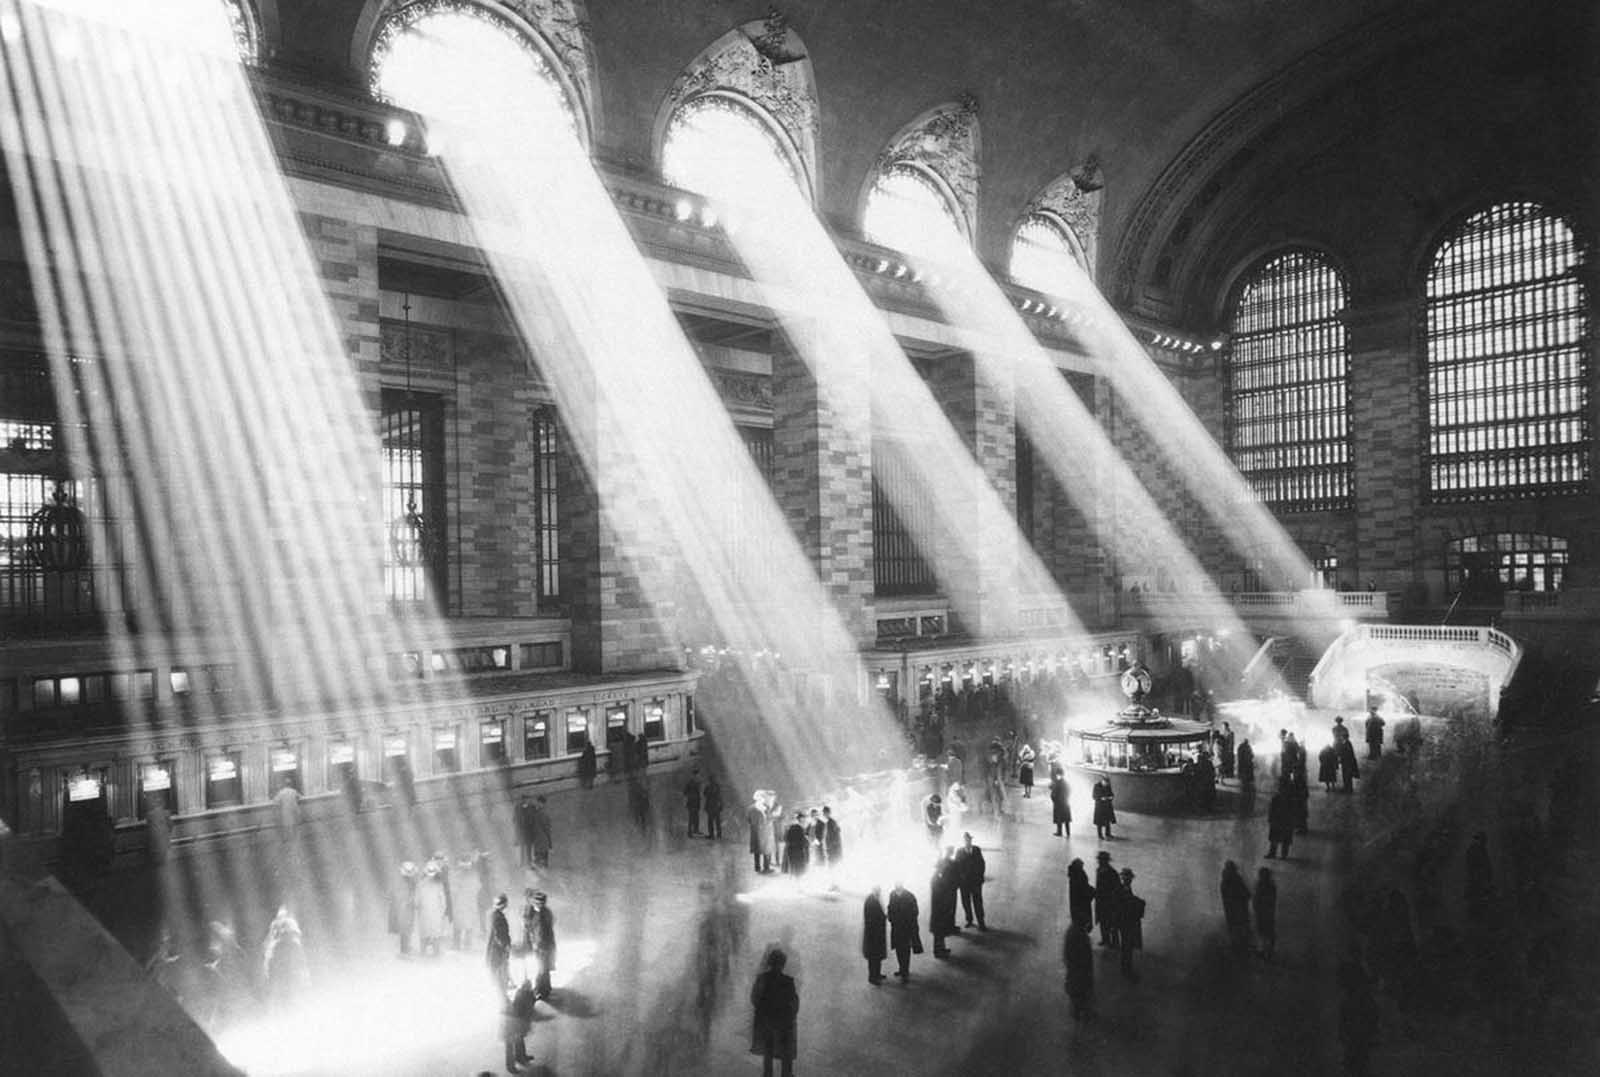 Grand Central Terminal in New York City